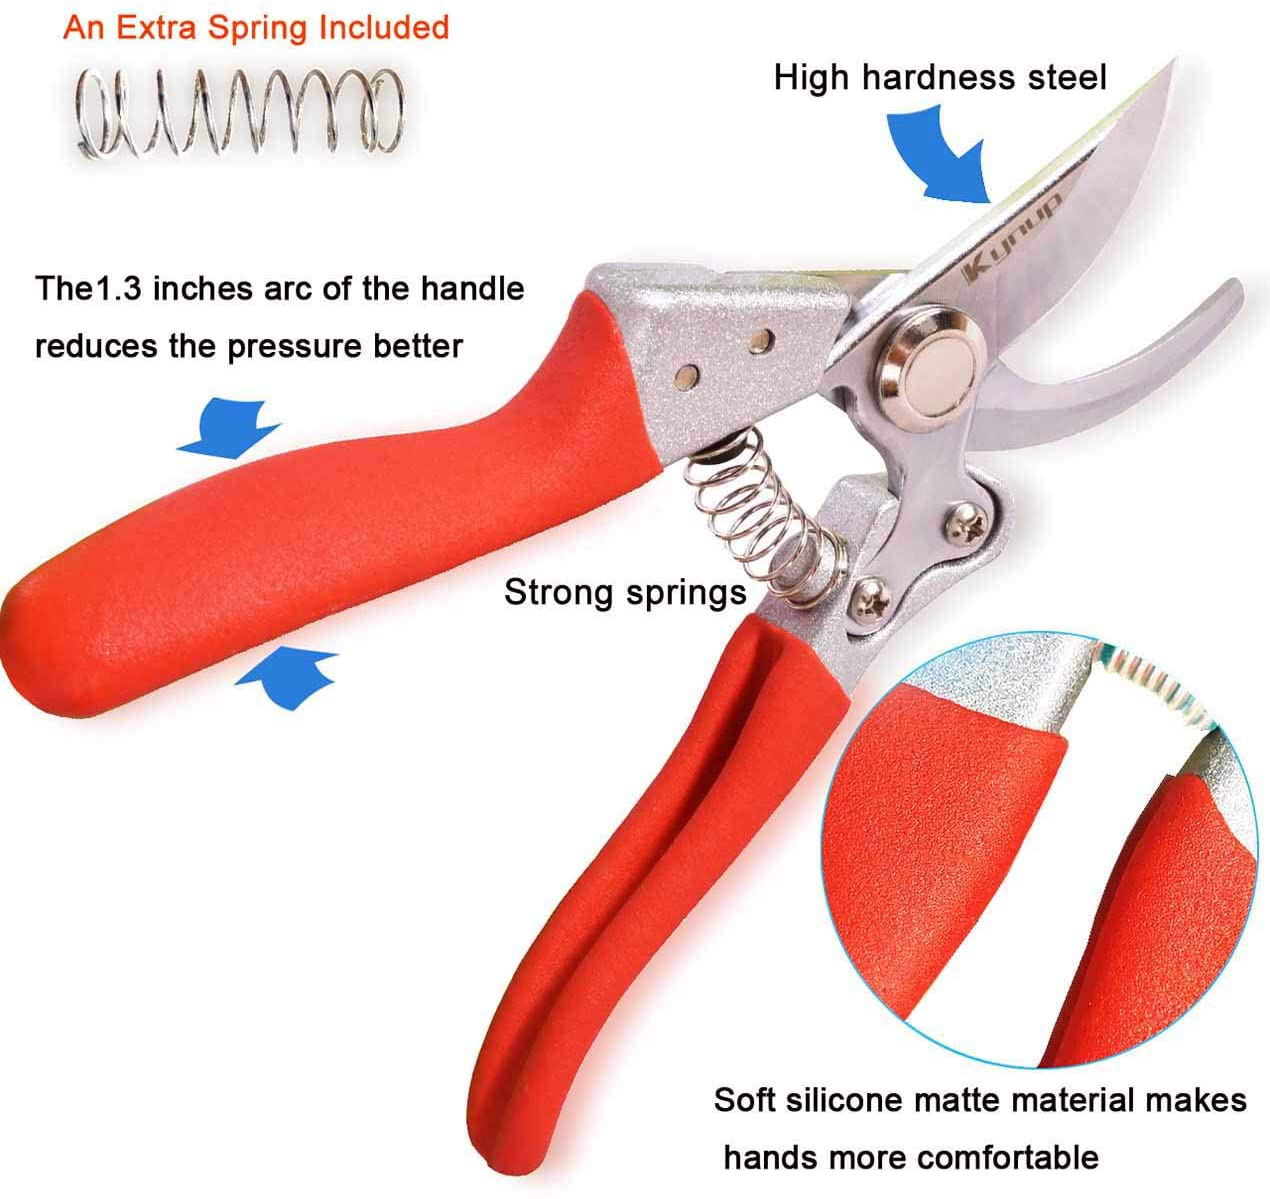 Kynup 8.6" Gardening Shears, Professional Bypass Pruner Hand Shears, Tree Trimmers Secateurs, Hedge & Garden Shears, Clippers for Plants, Gardening, Trimming, Garden Tools (Red)